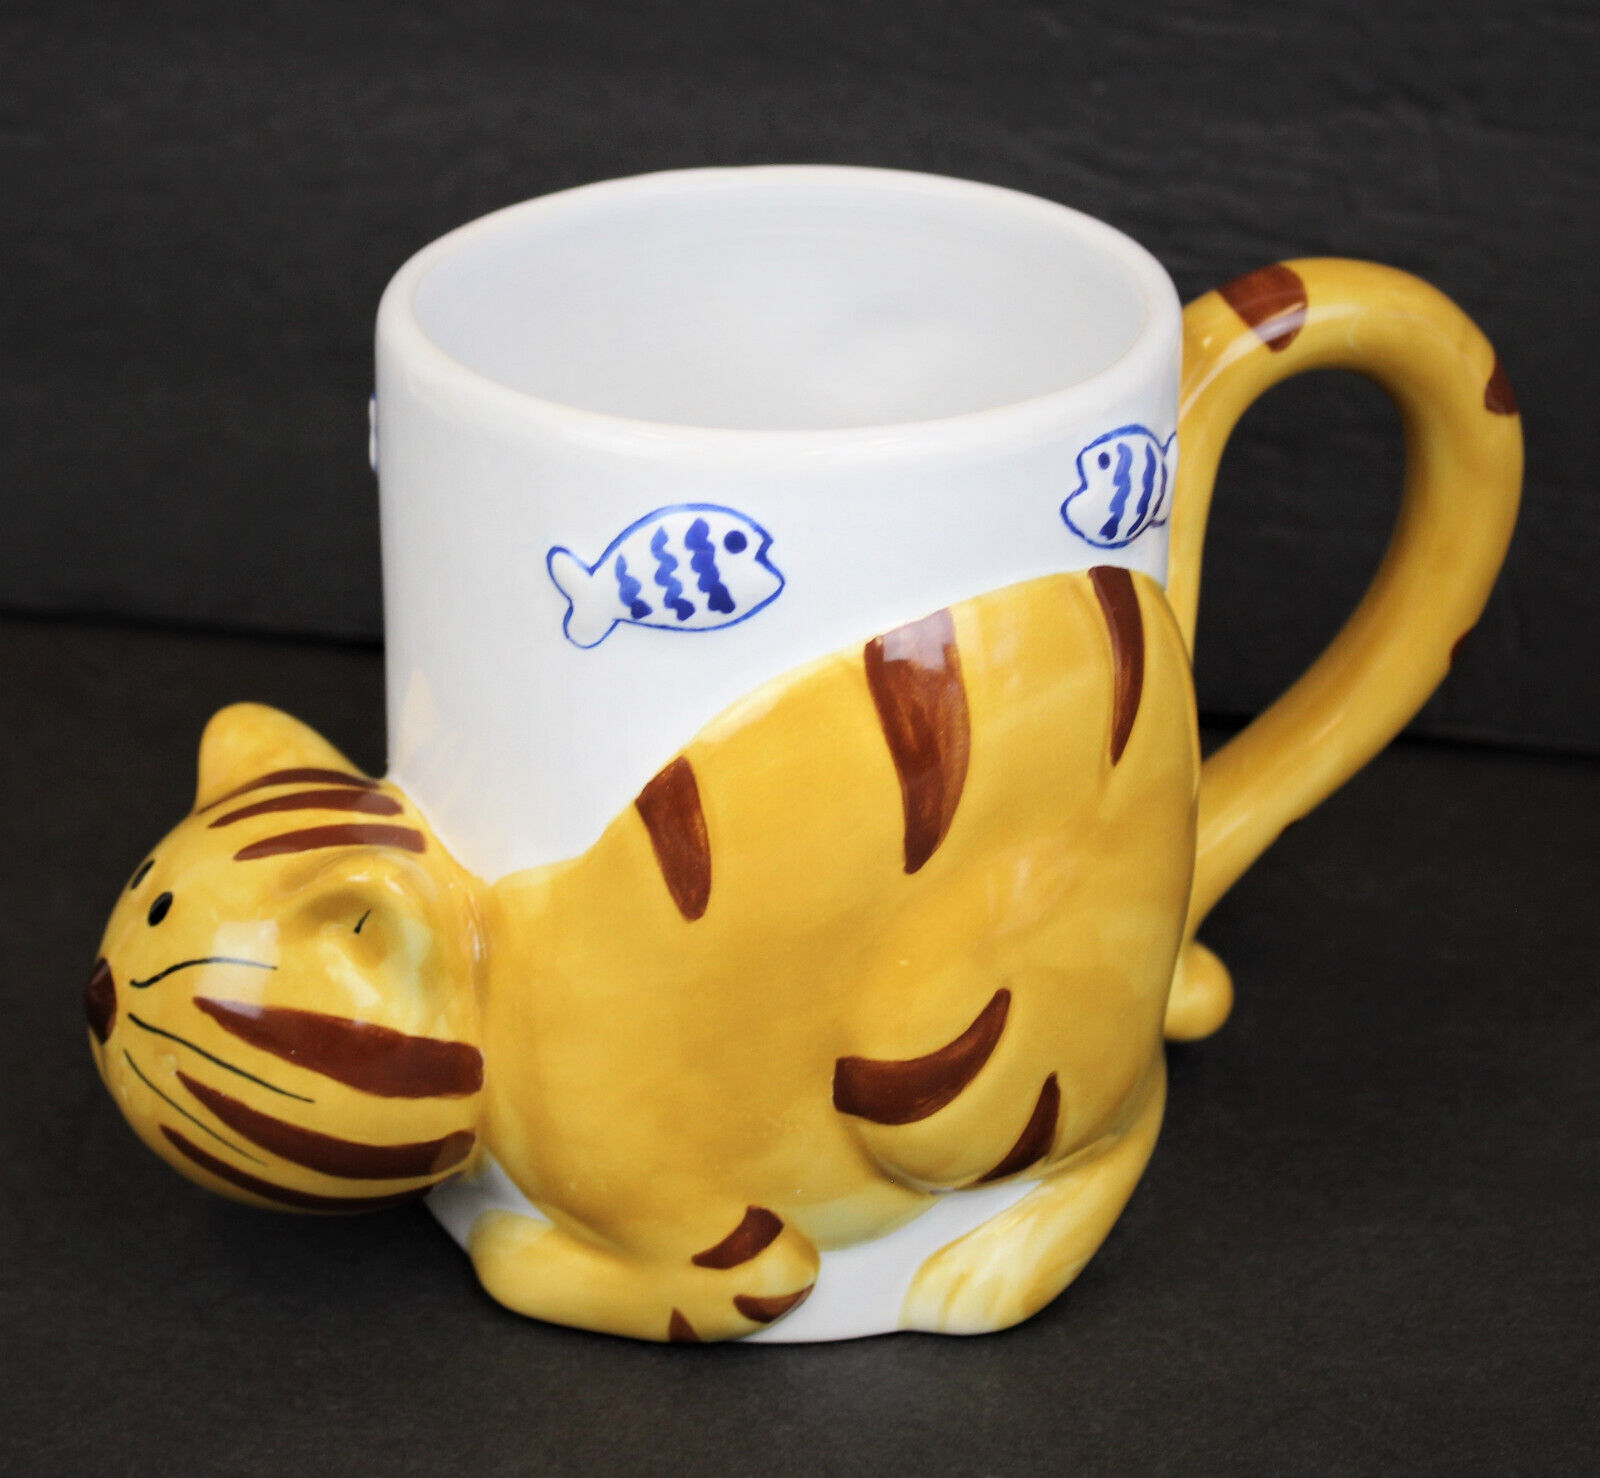 Orange Tabby Cat Coffee Mug Cup 3D Kitten JC Penny Home Collection Cat Lovers